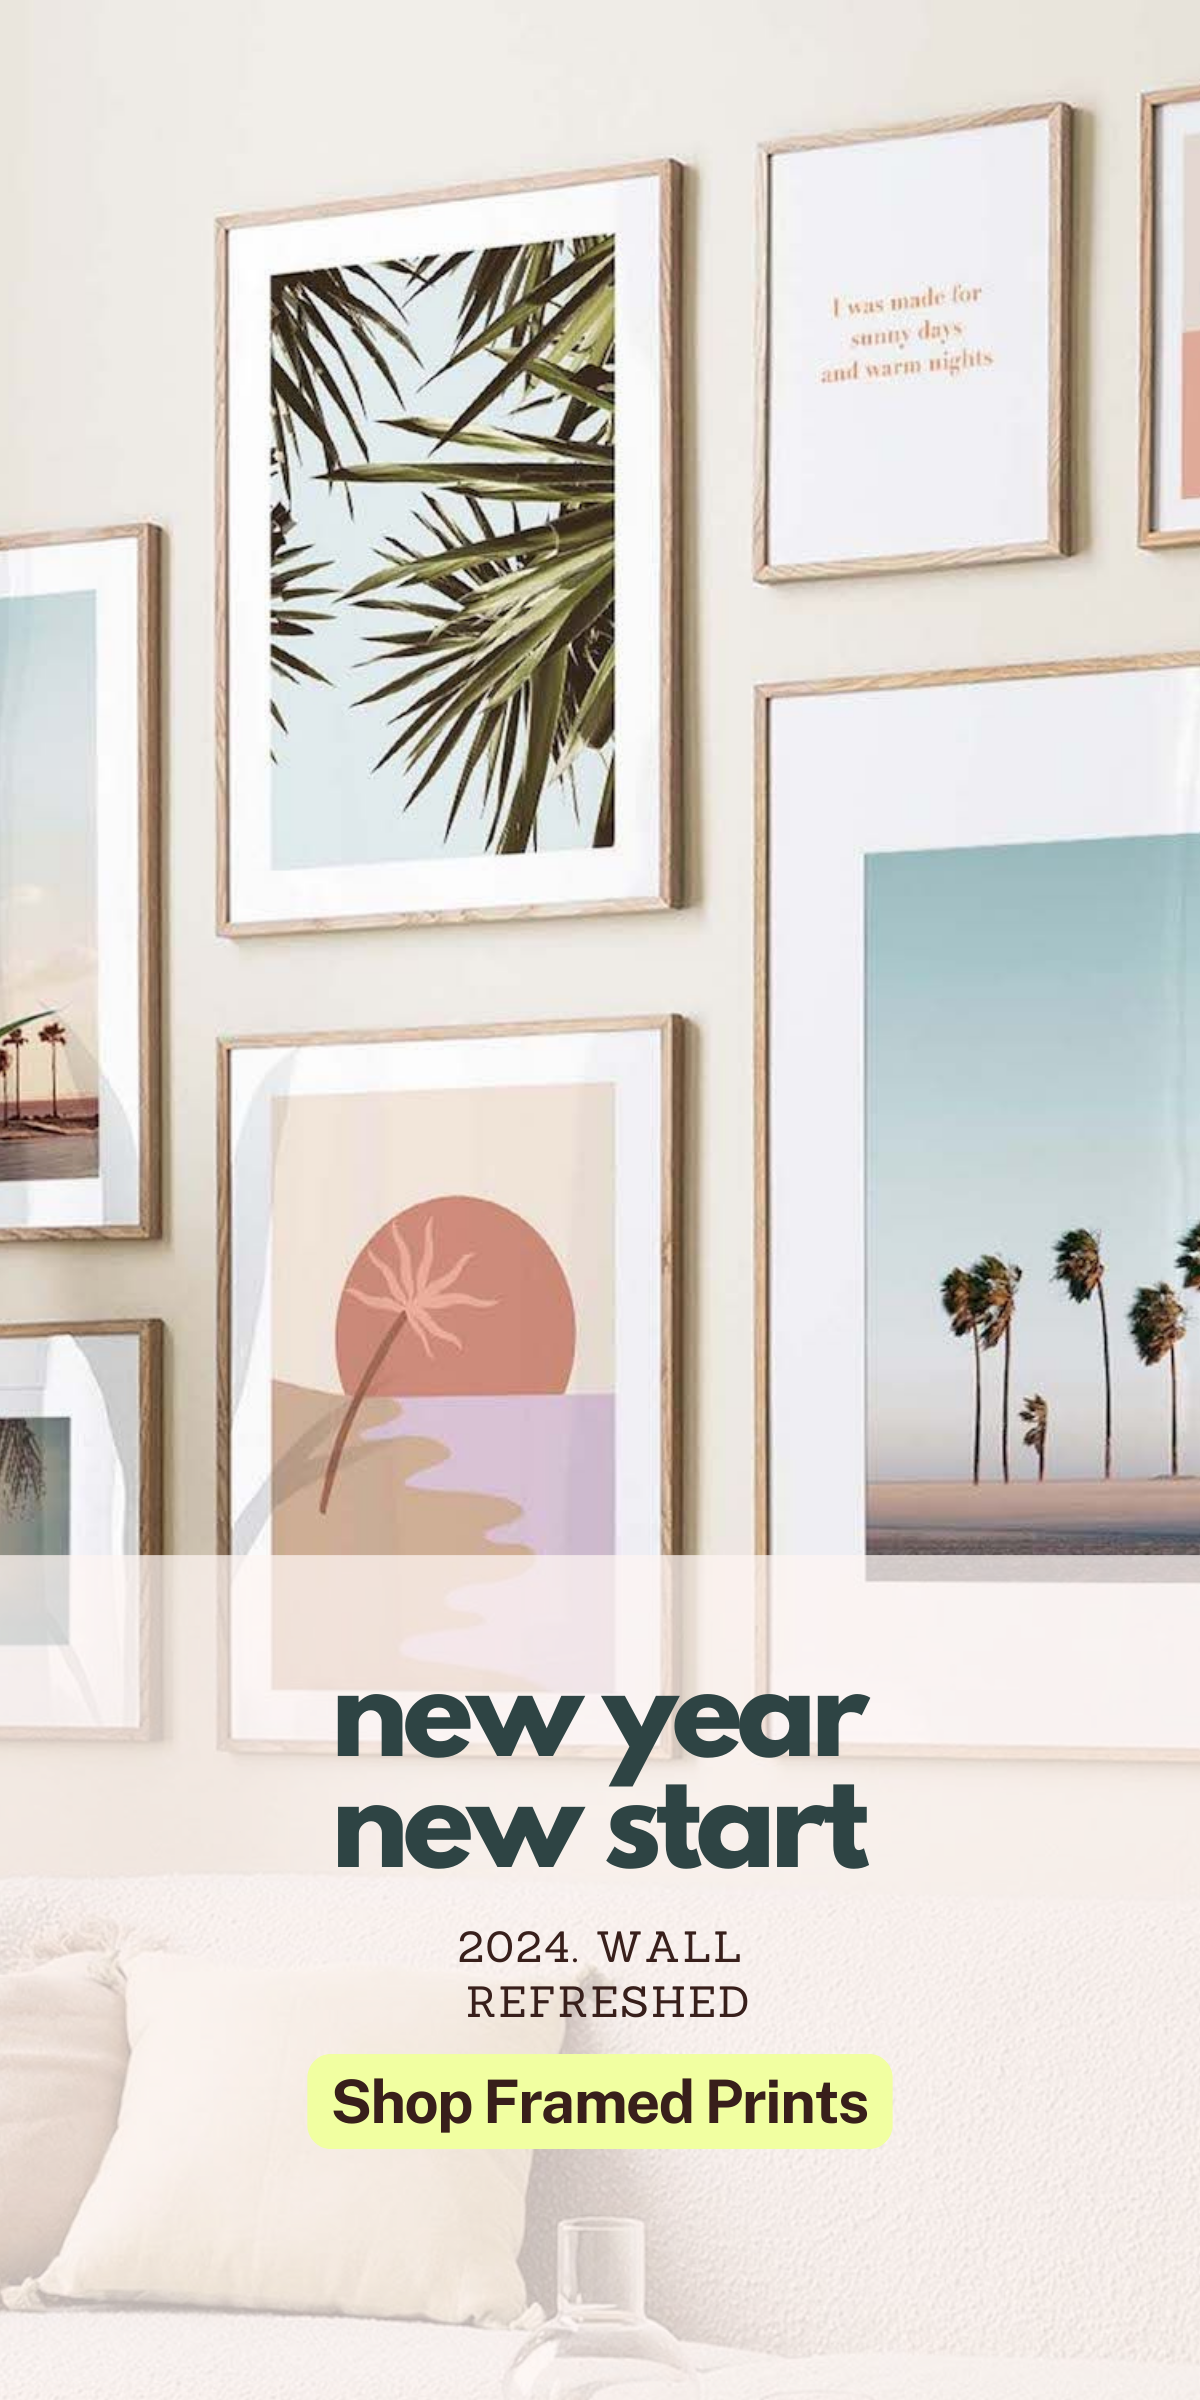 New Year New You - Framed Prints